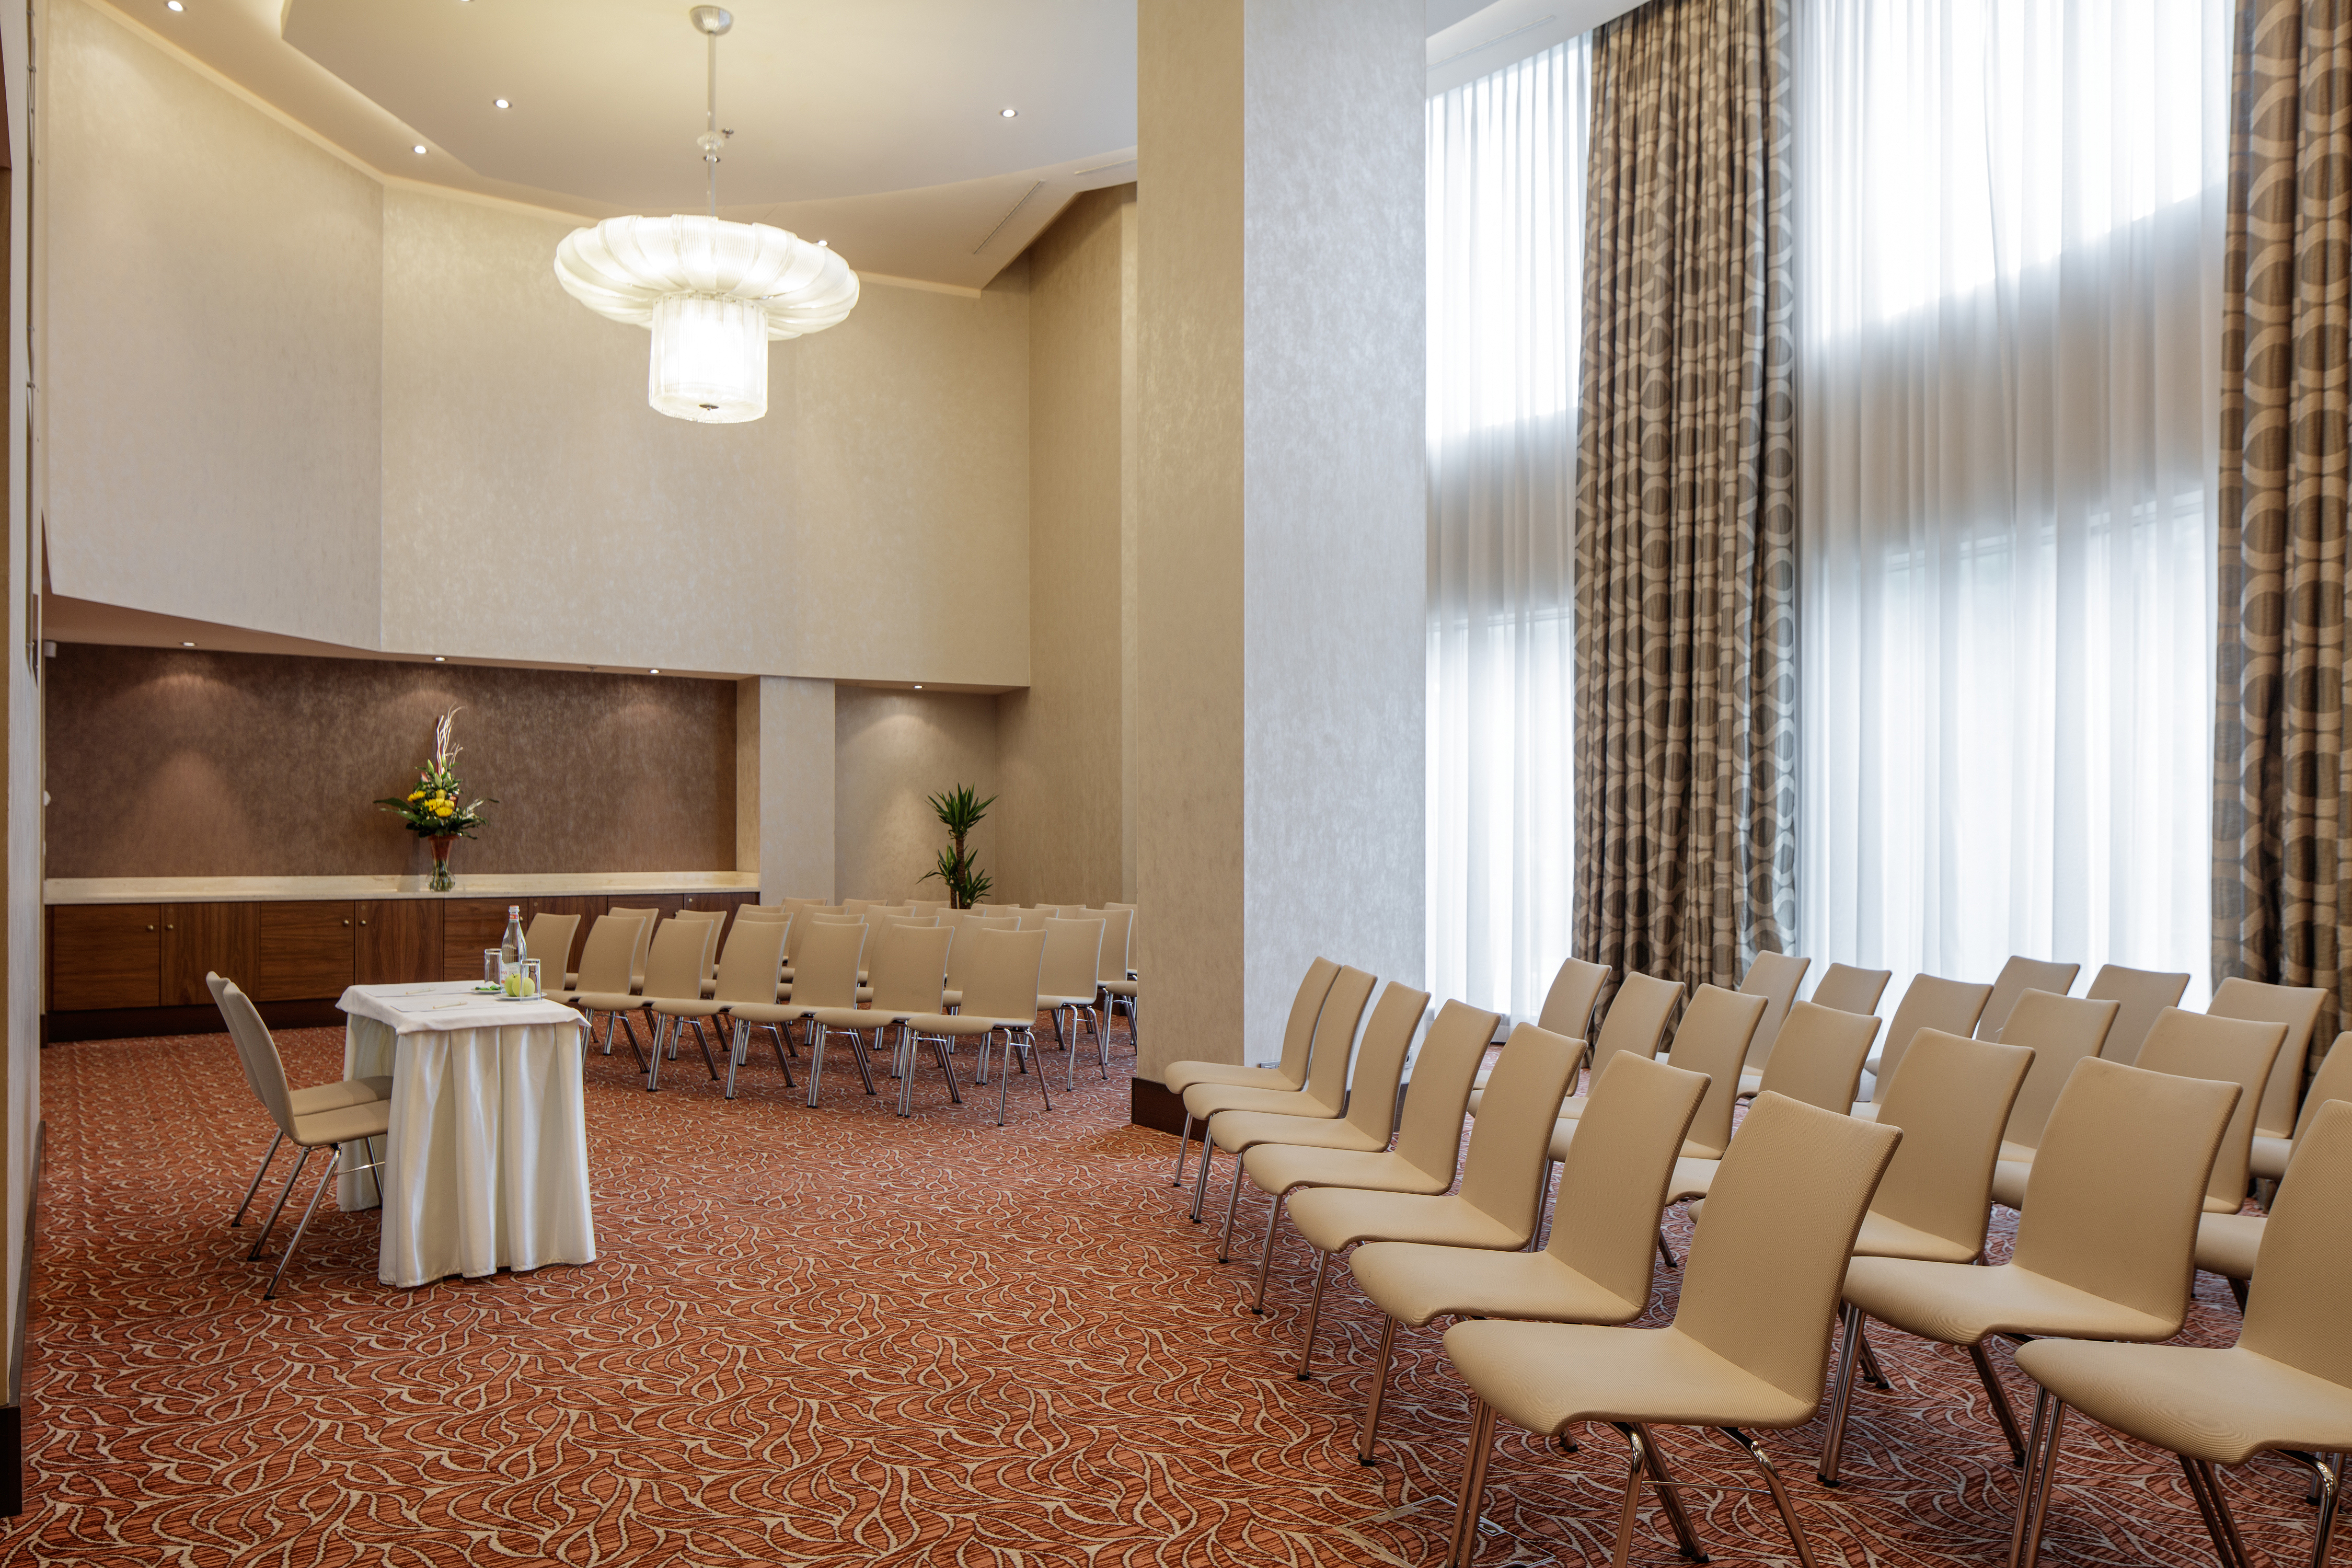 Long Sheer Drapes on Windows in Room Foyer Arranged Theater Style With Rows of Chairs Facing Speaker's Table and Chair